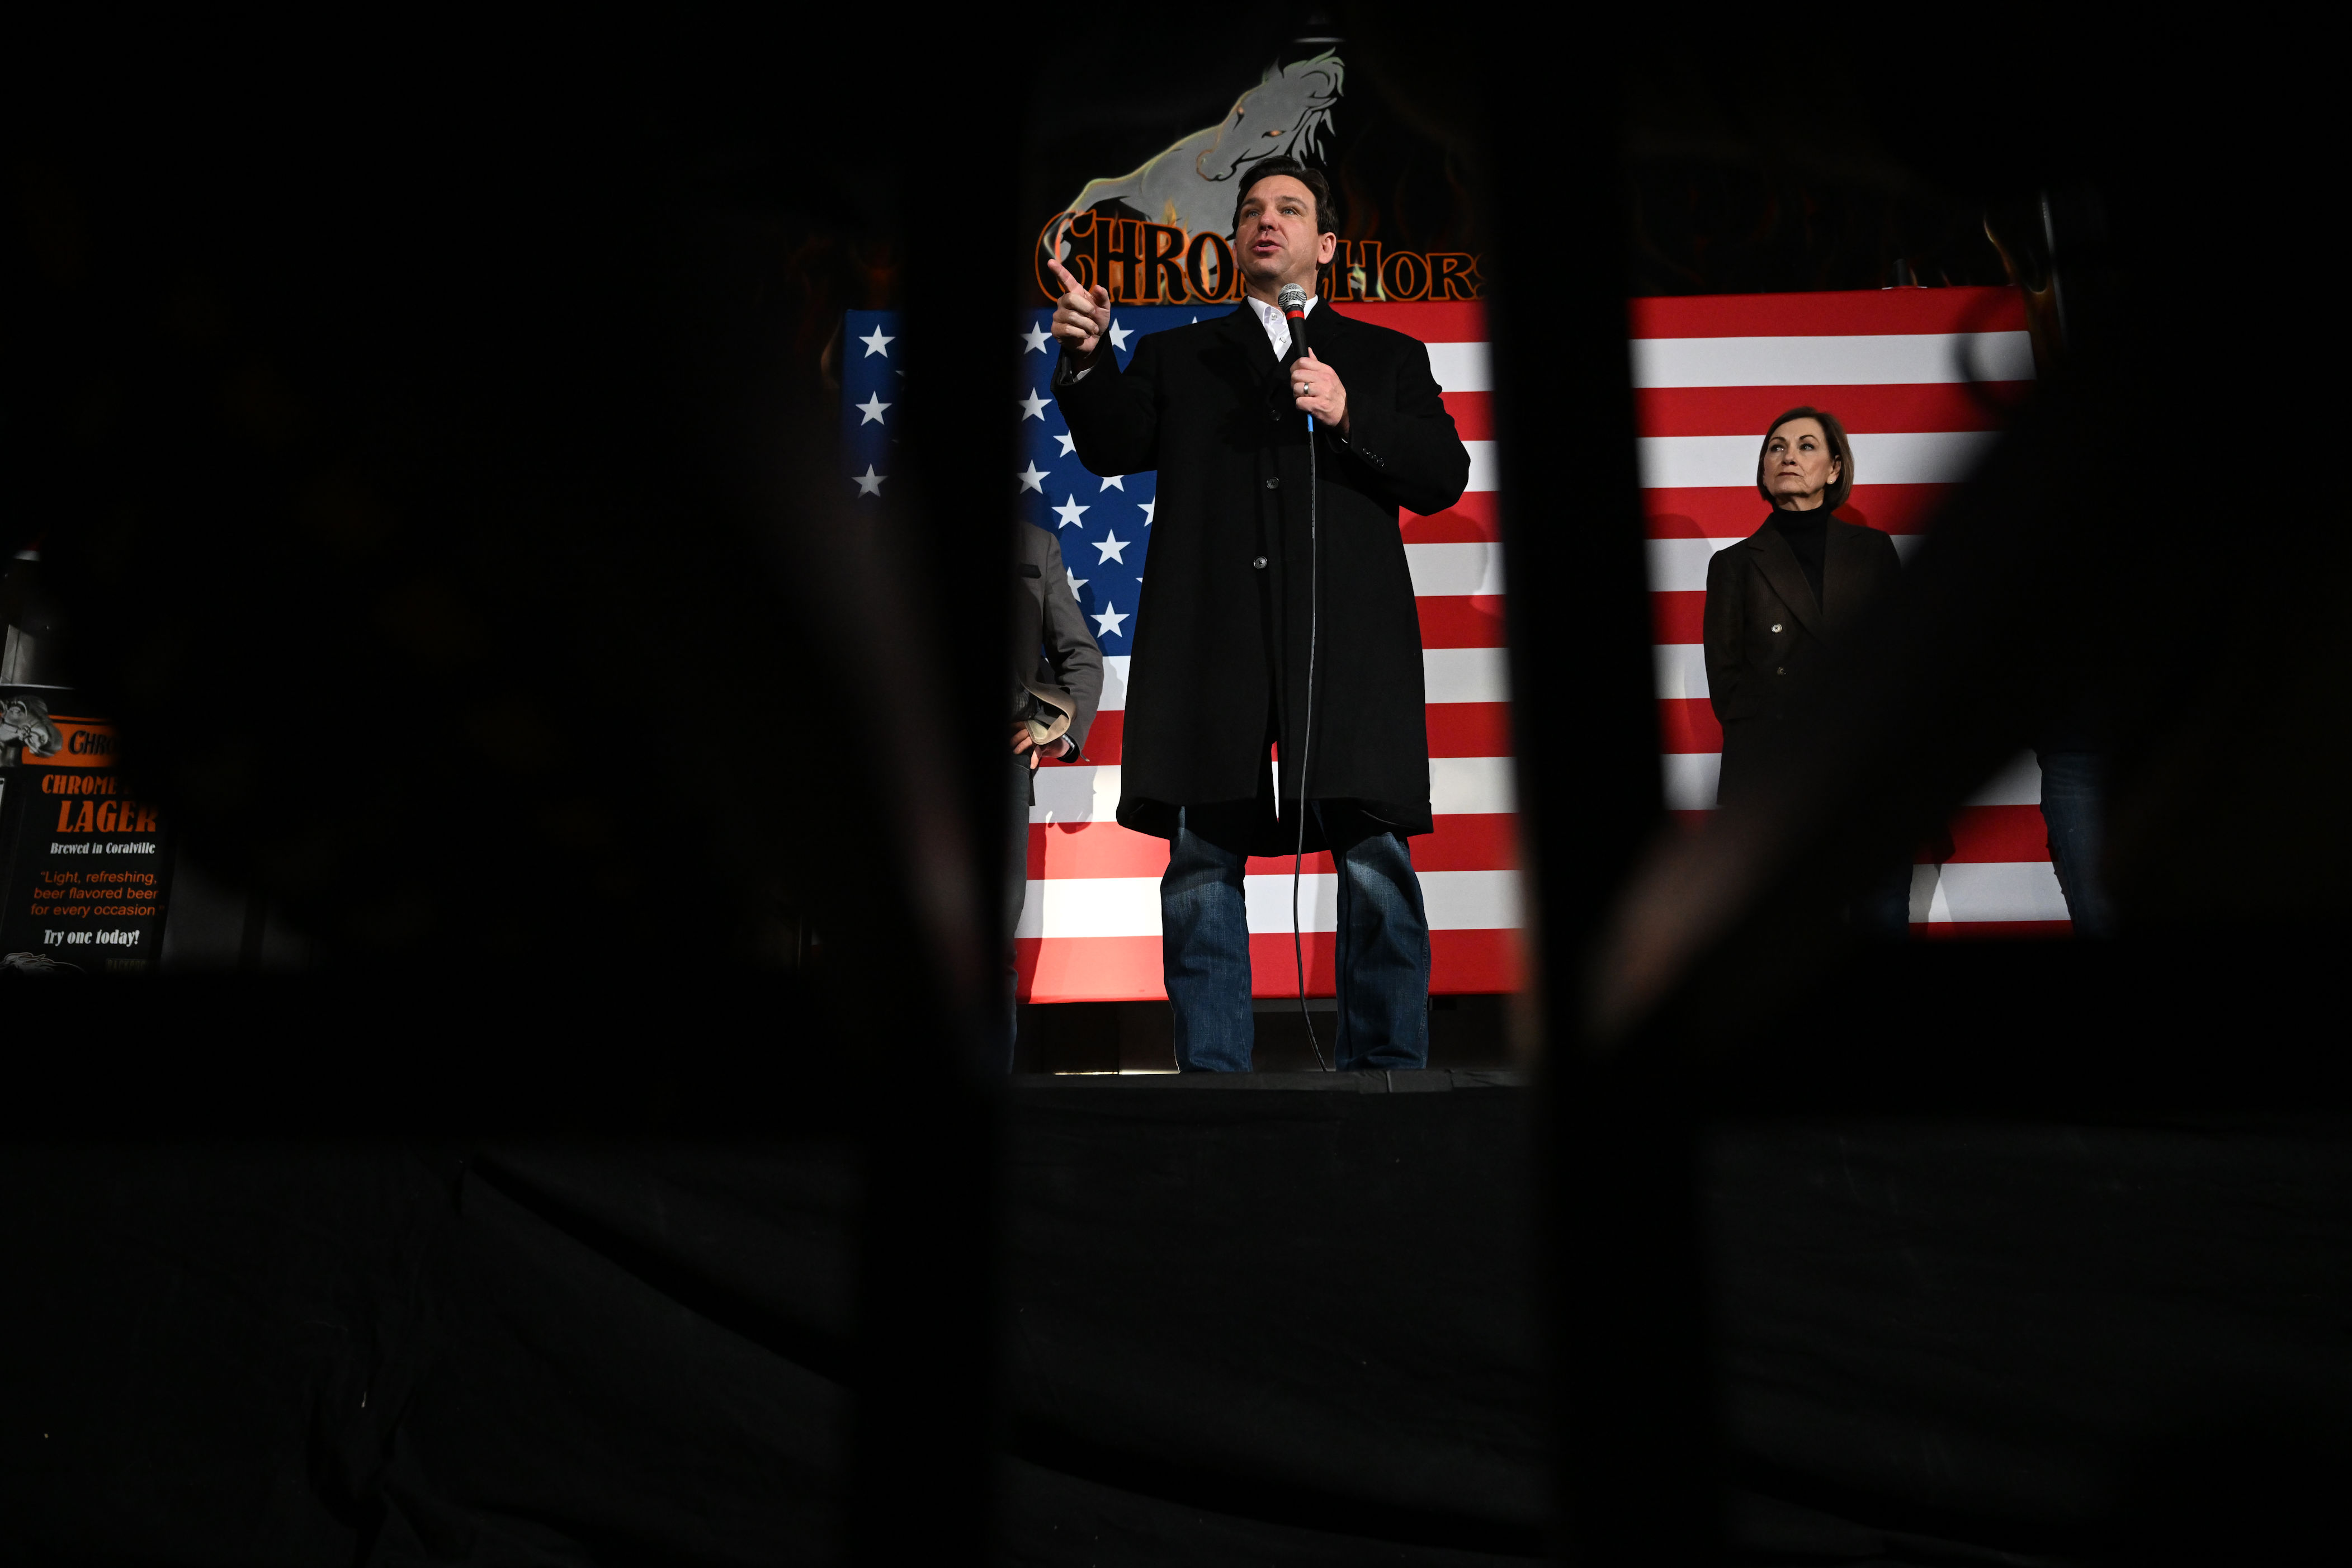 trump-dominated iowa race barrels to contentious finish in frigid weather